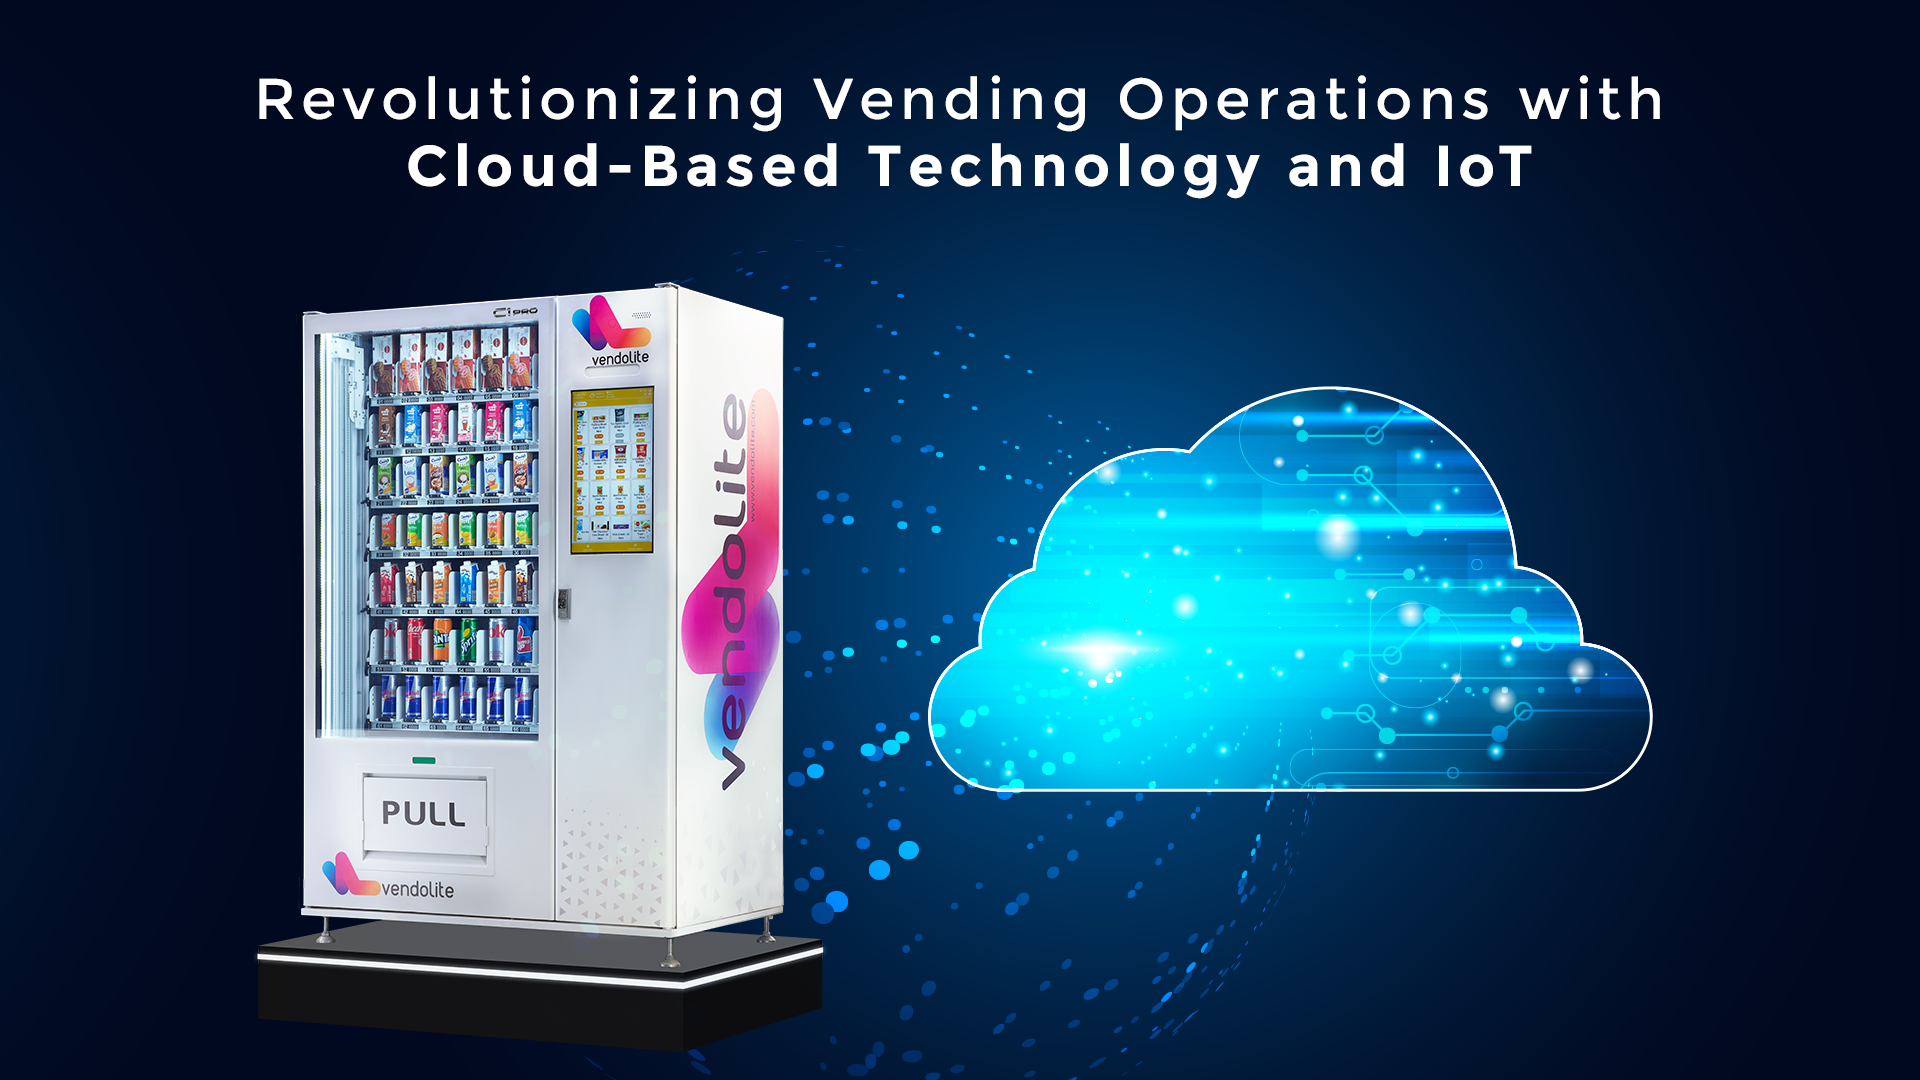 Revolutionizing Vending Operations with Cloud-Based Technology and IoT